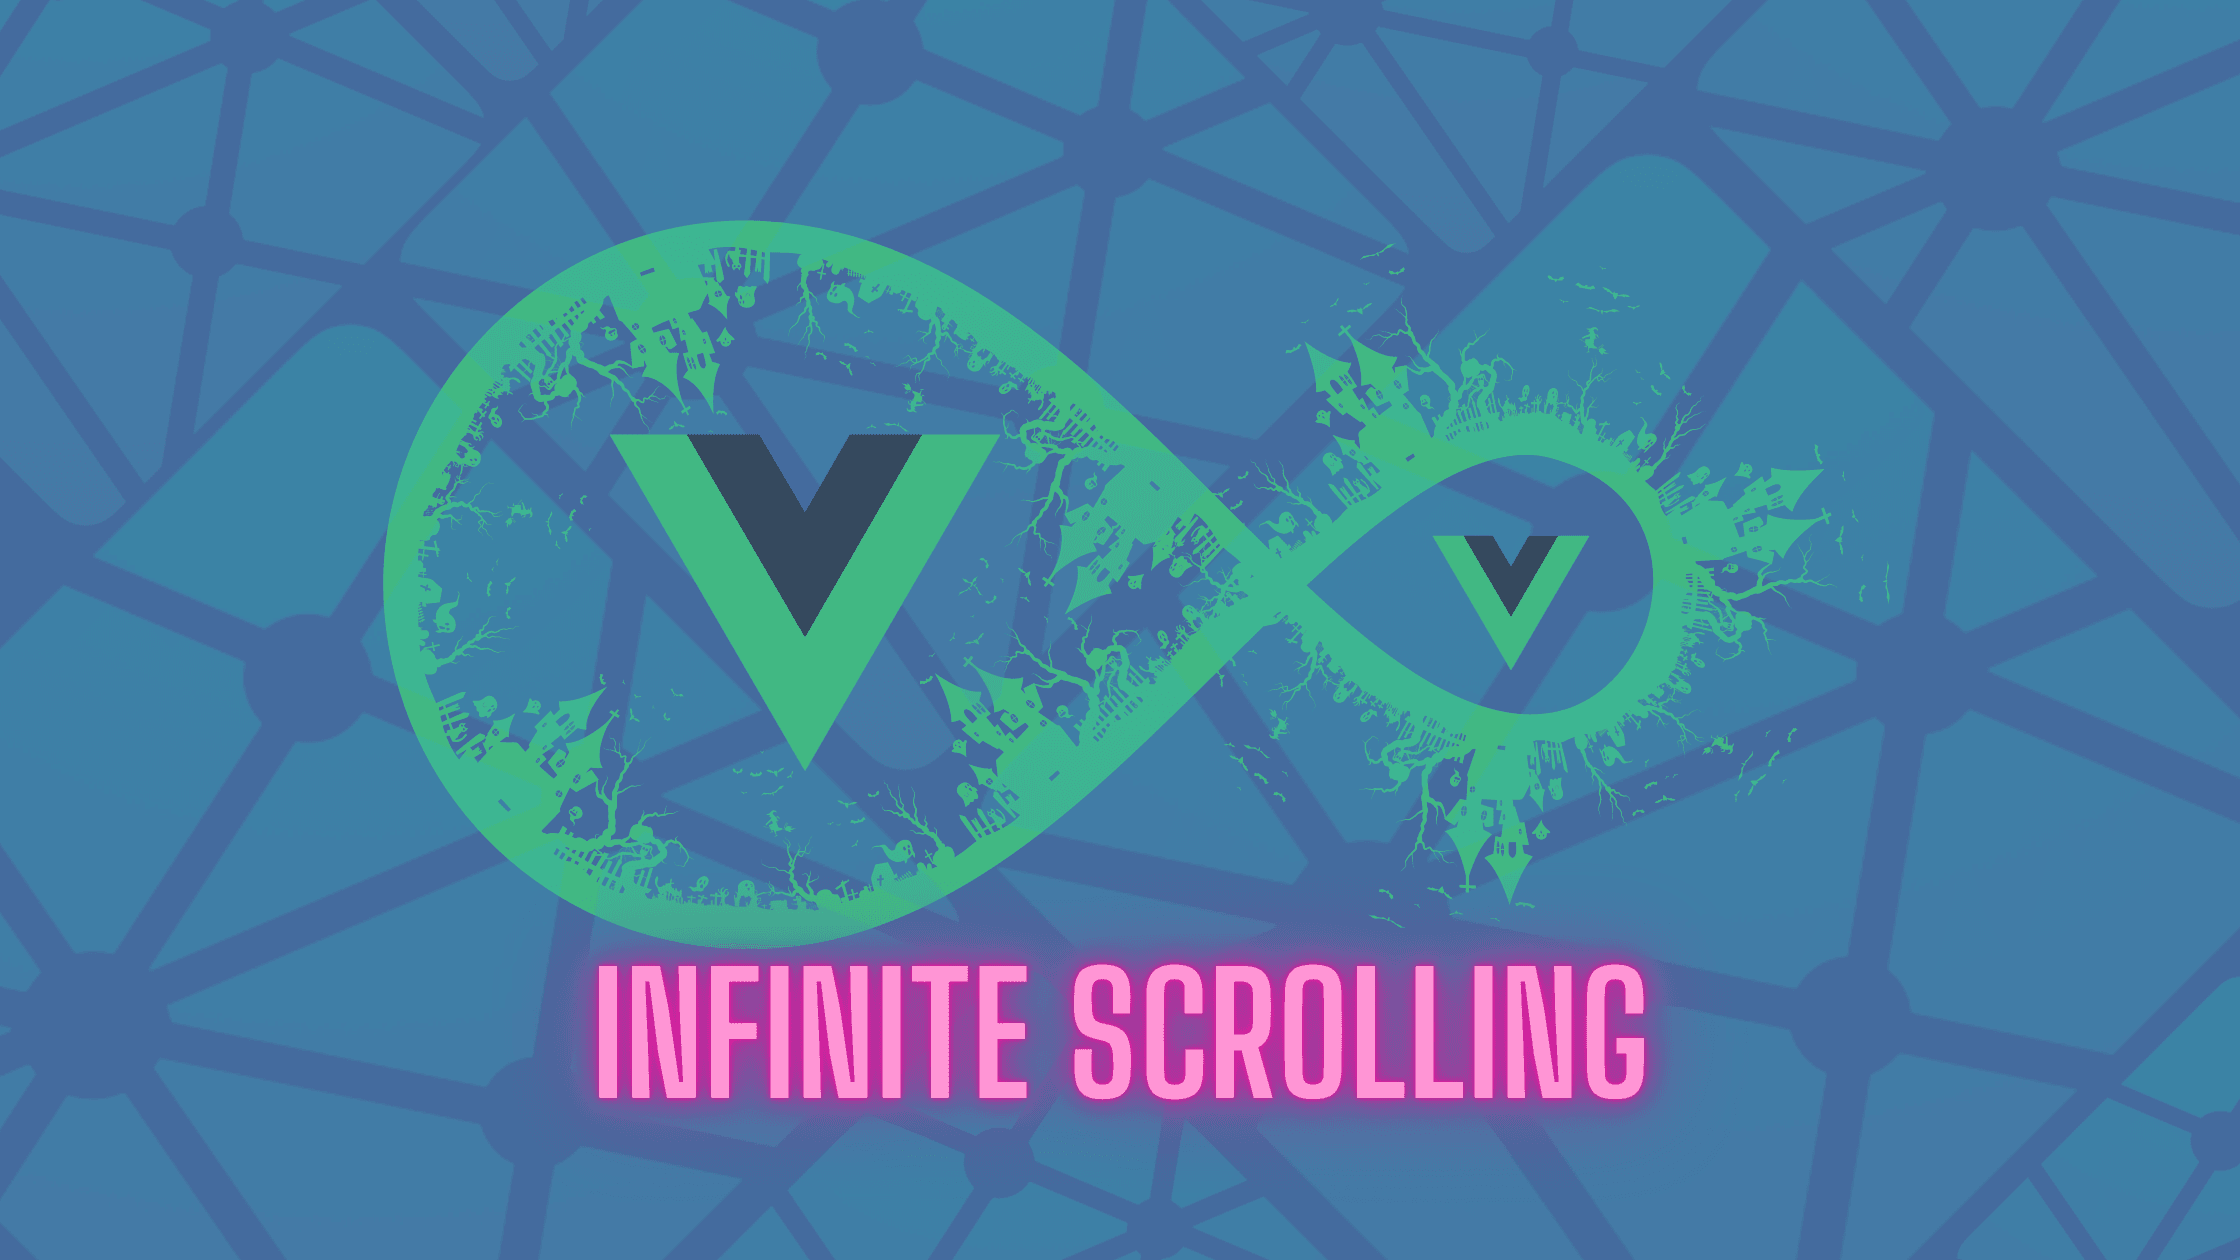 Infinite Scrolling in Vue using the Vue Intersection Observer API